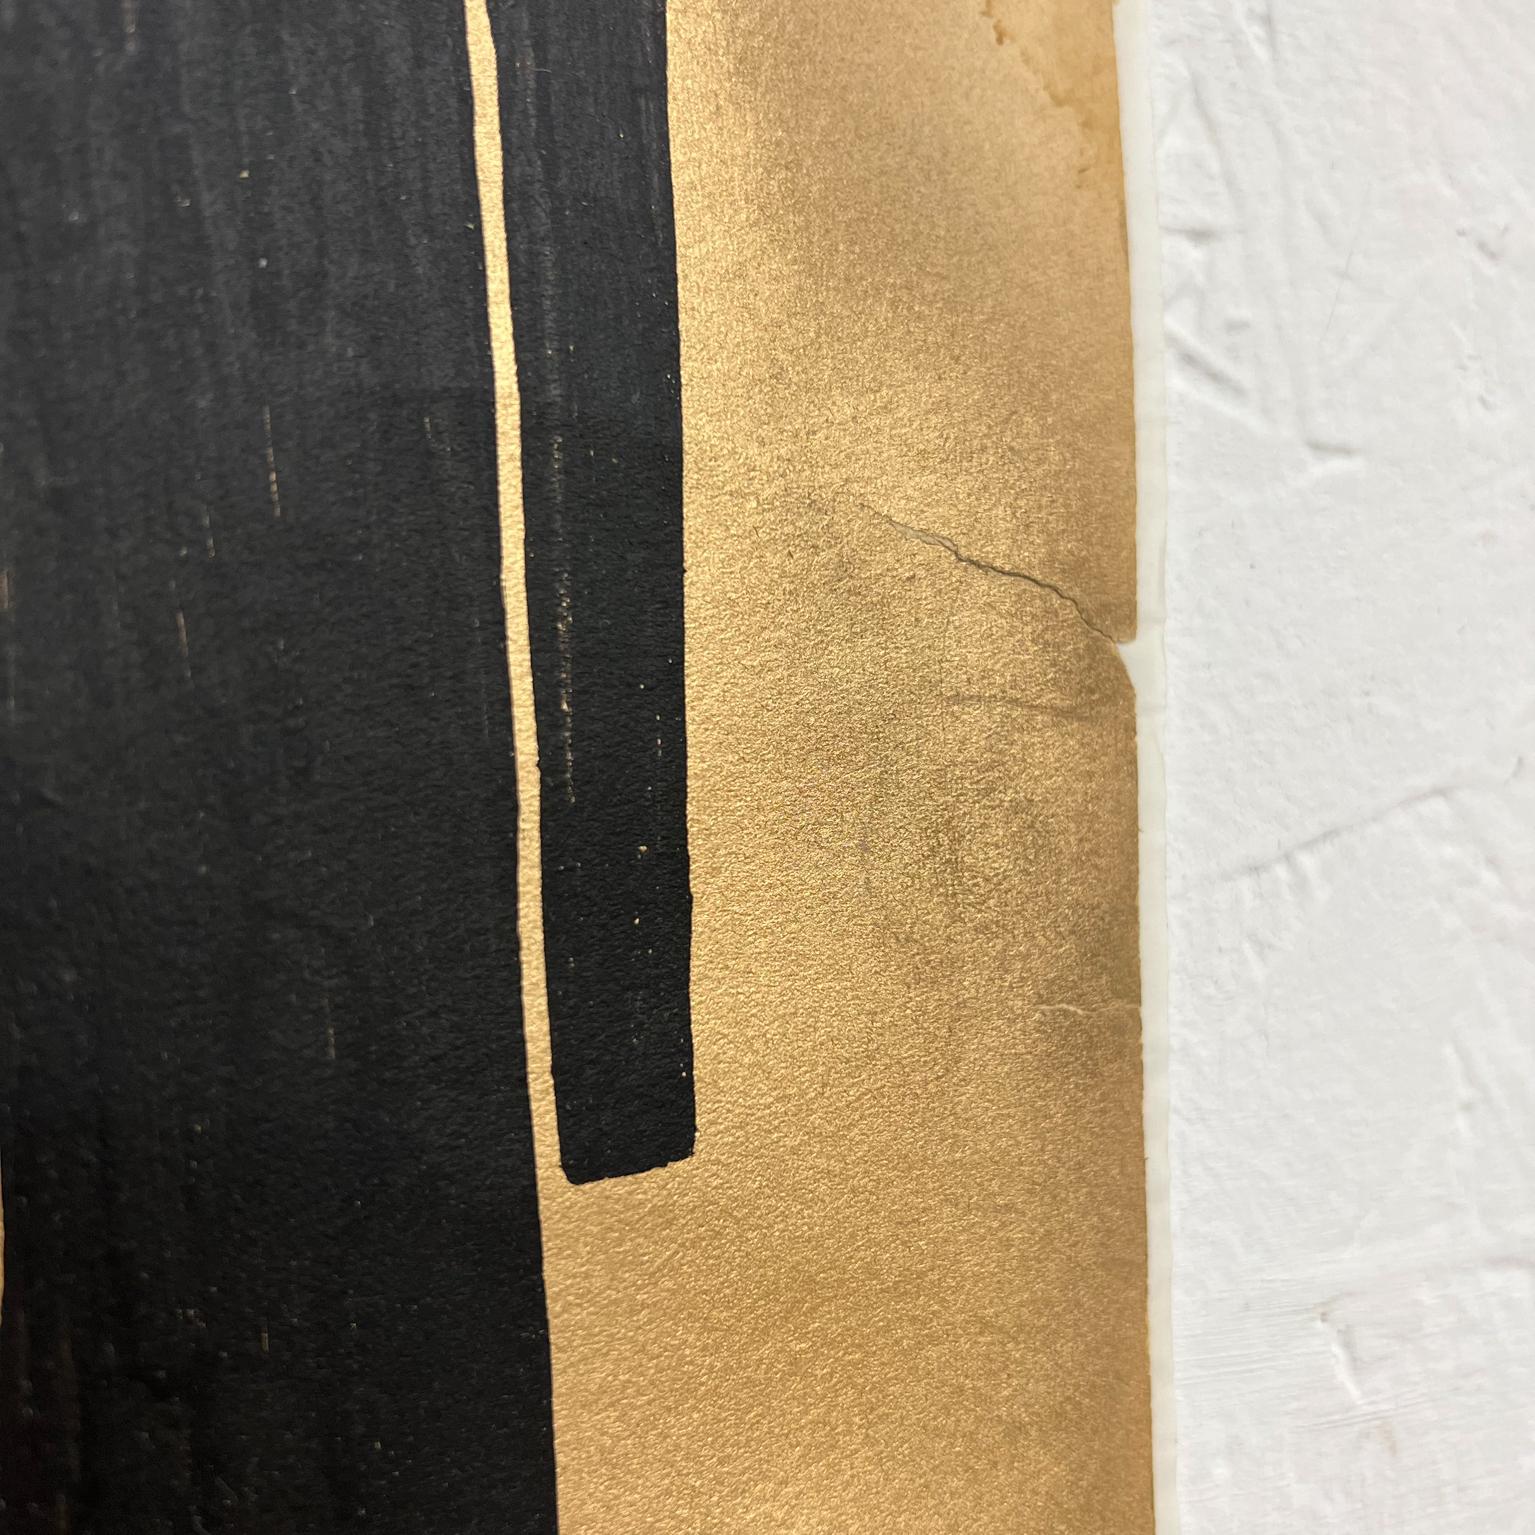 1960s Abstract Modernism Art Mexico Artist M. Goeritz Gold Gilt Paper Black Ink For Sale 3